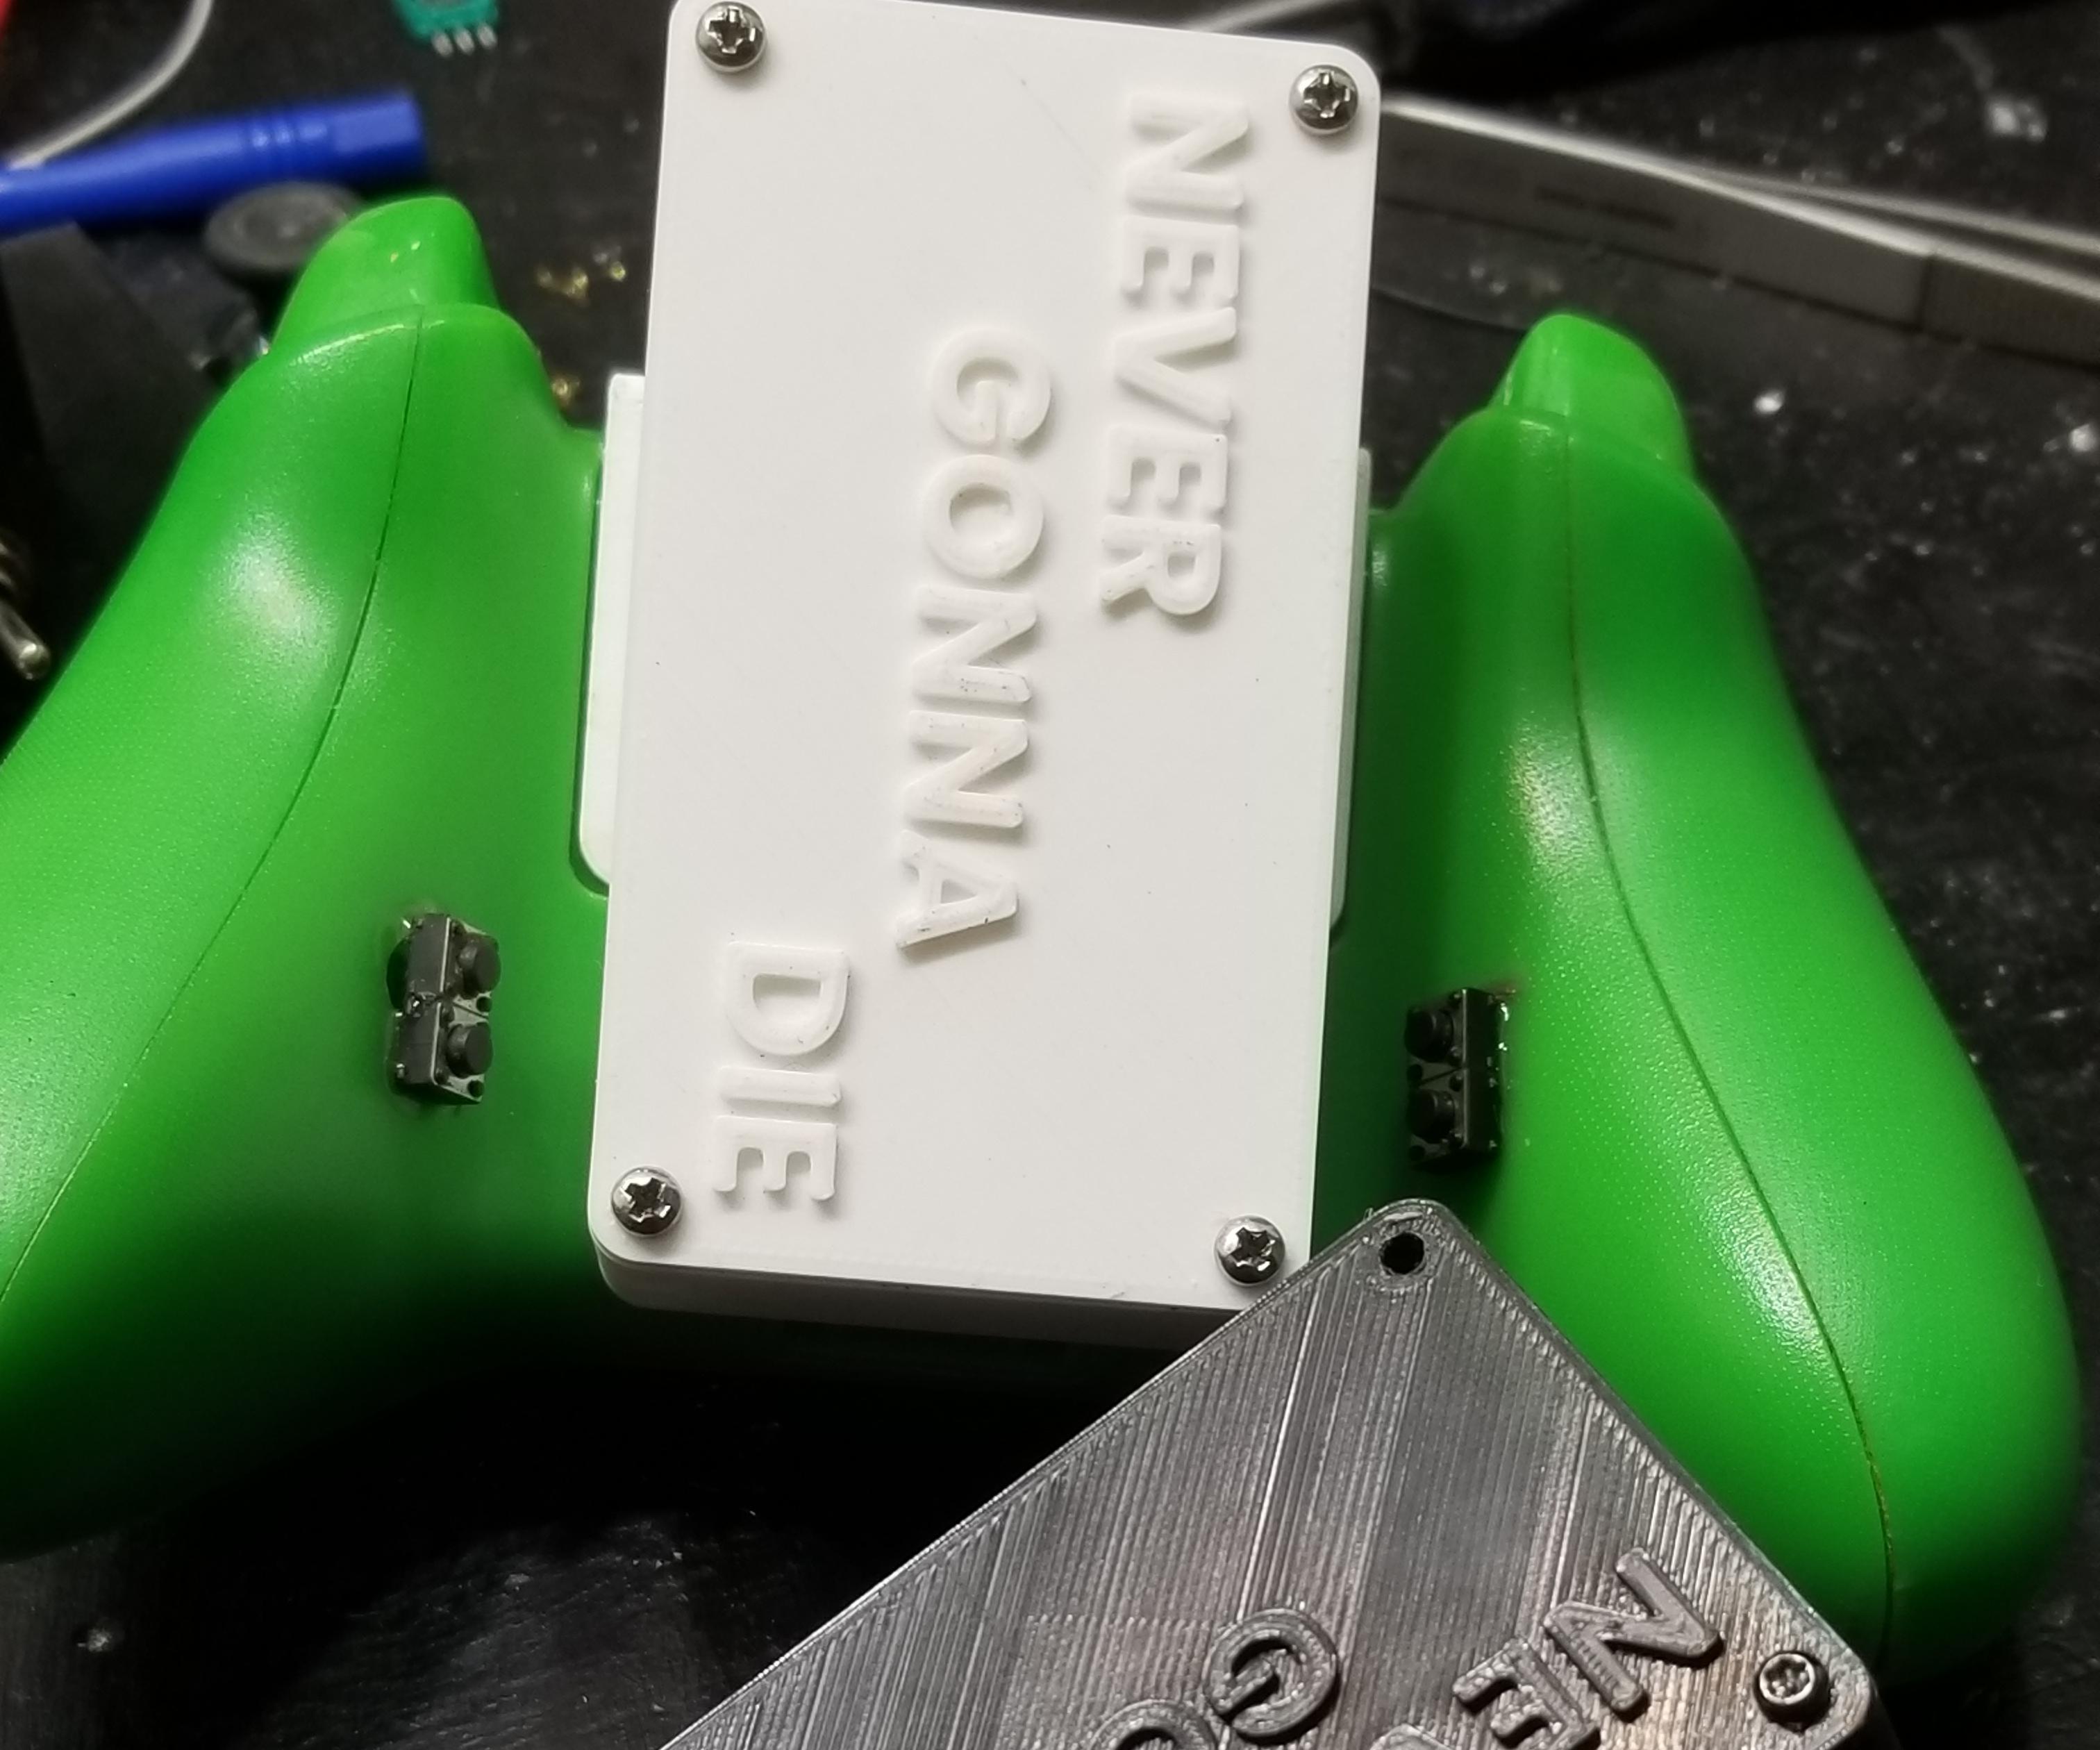 Giant 3D Printed Xbox One Controller Battery Pack